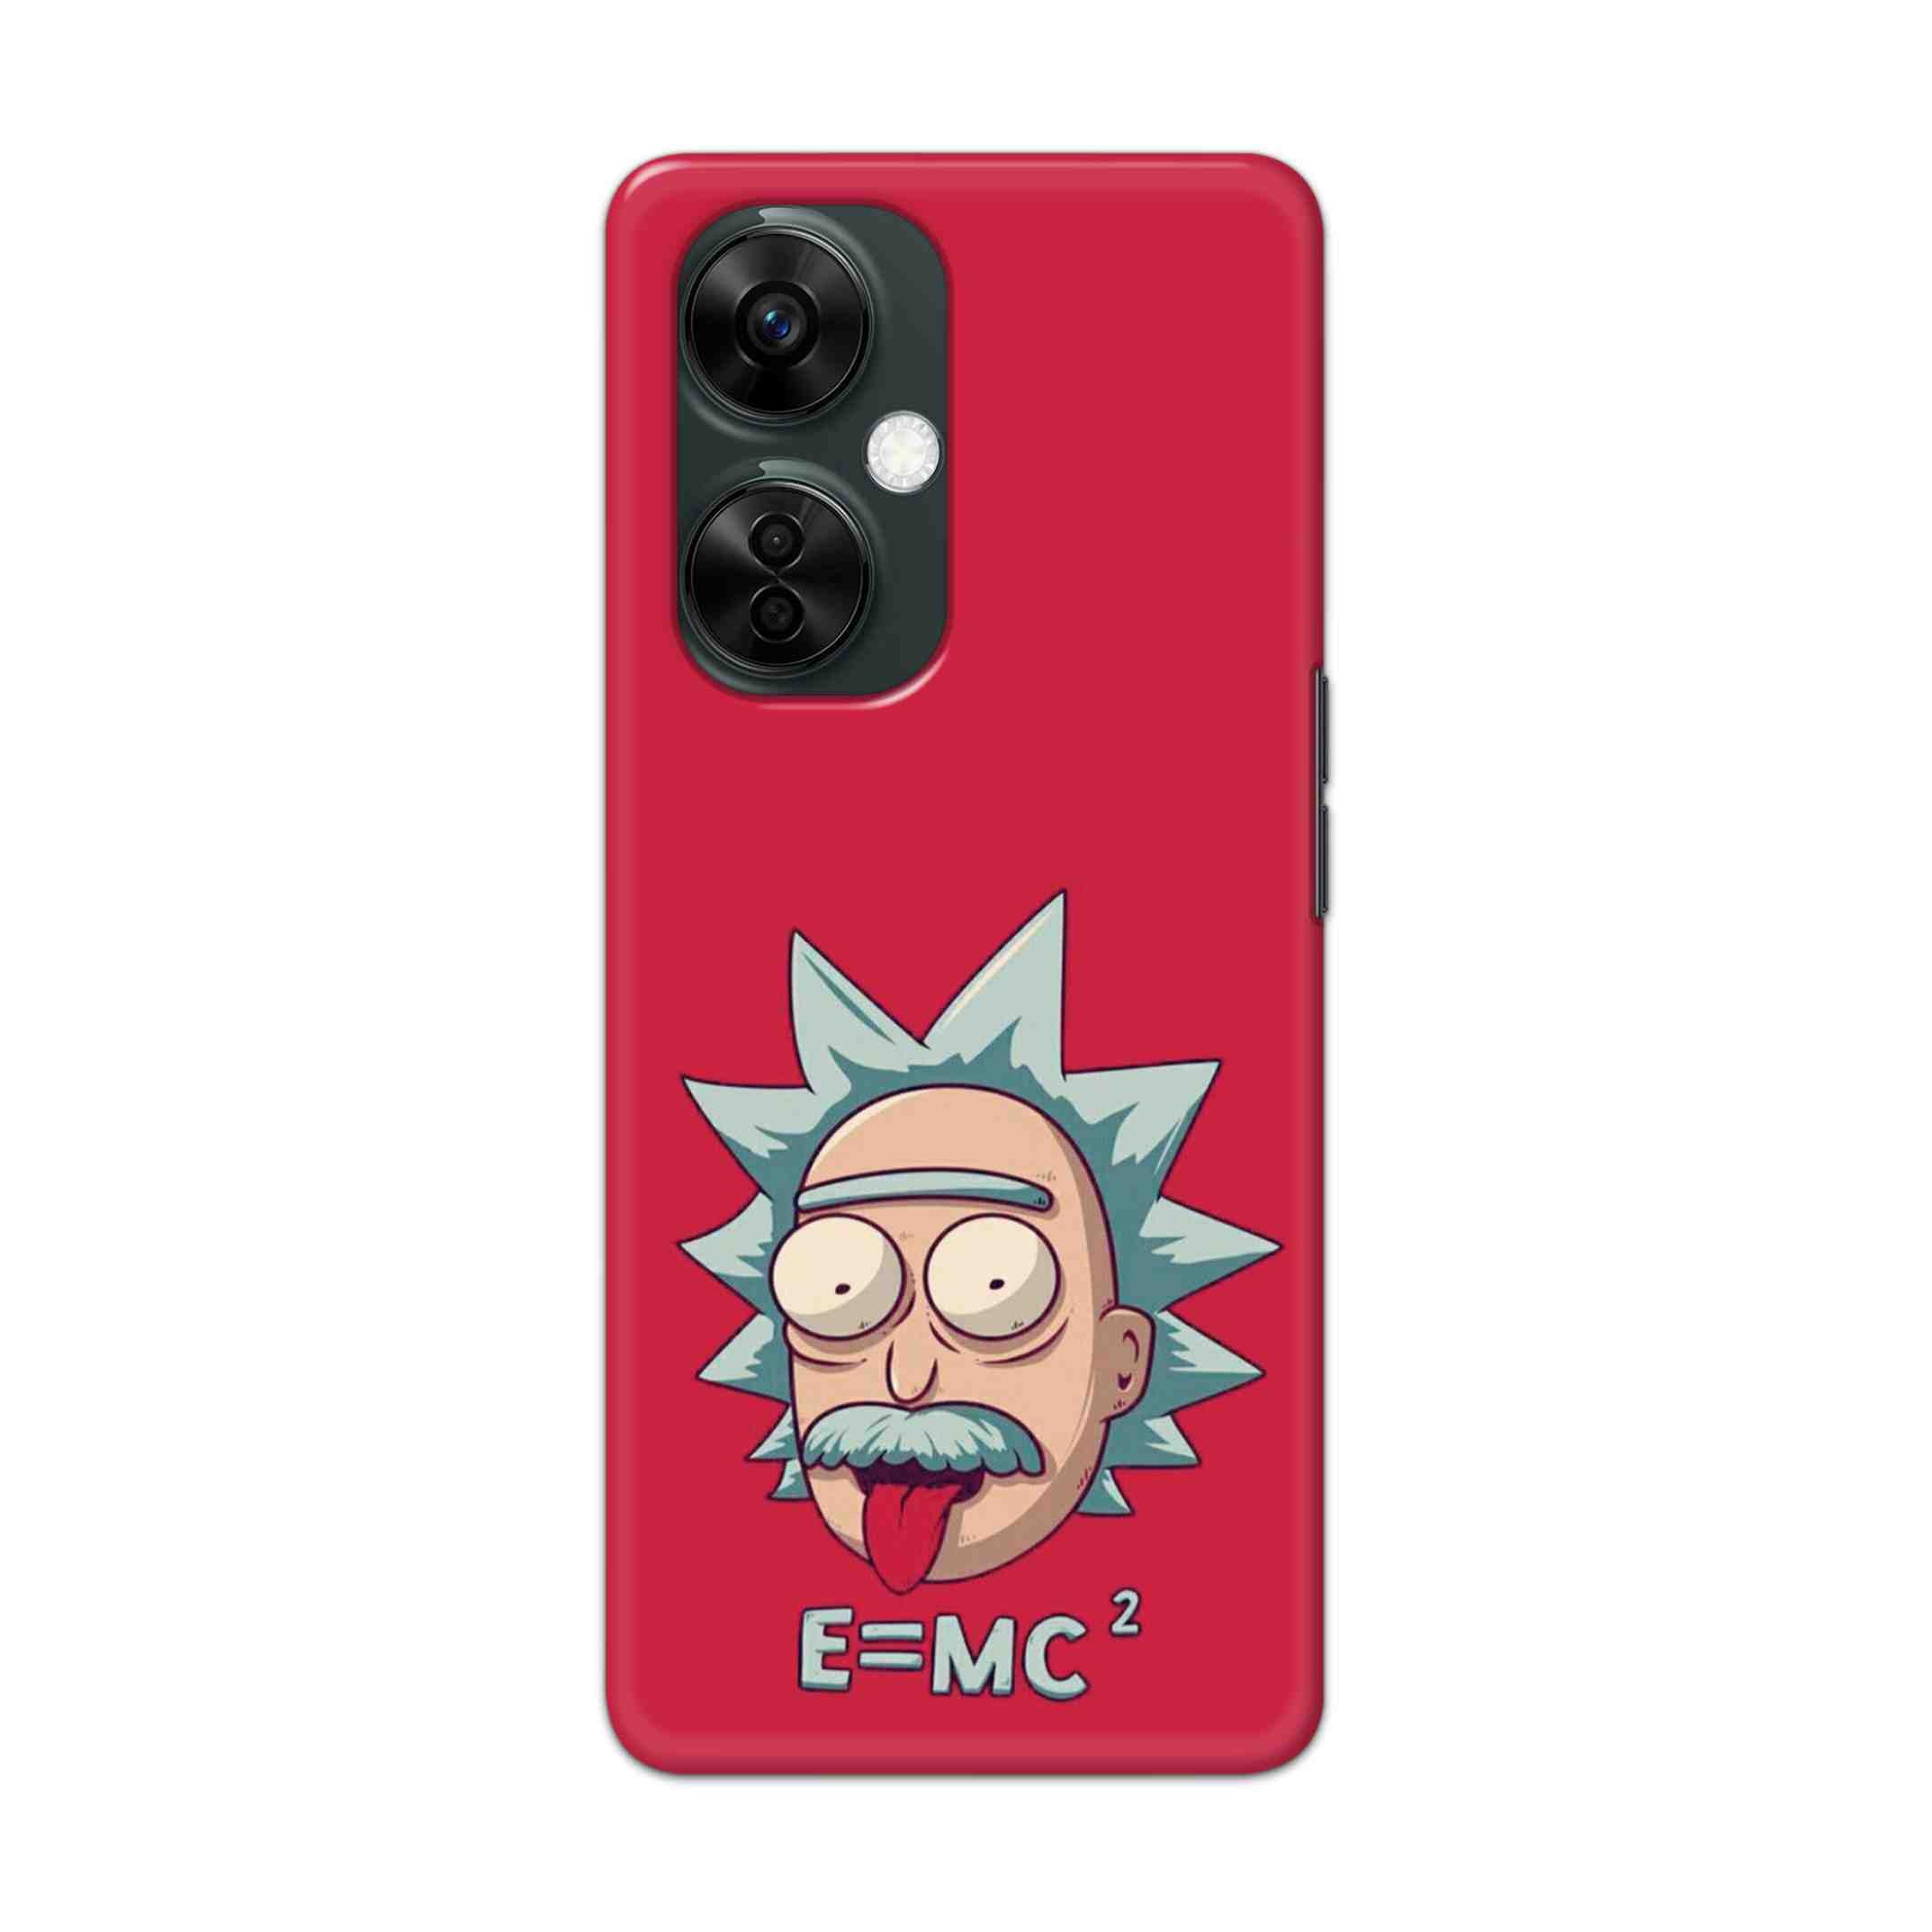 Buy E=Mc Hard Back Mobile Phone Case Cover For Oneplus Nord CE 3 Lite Online